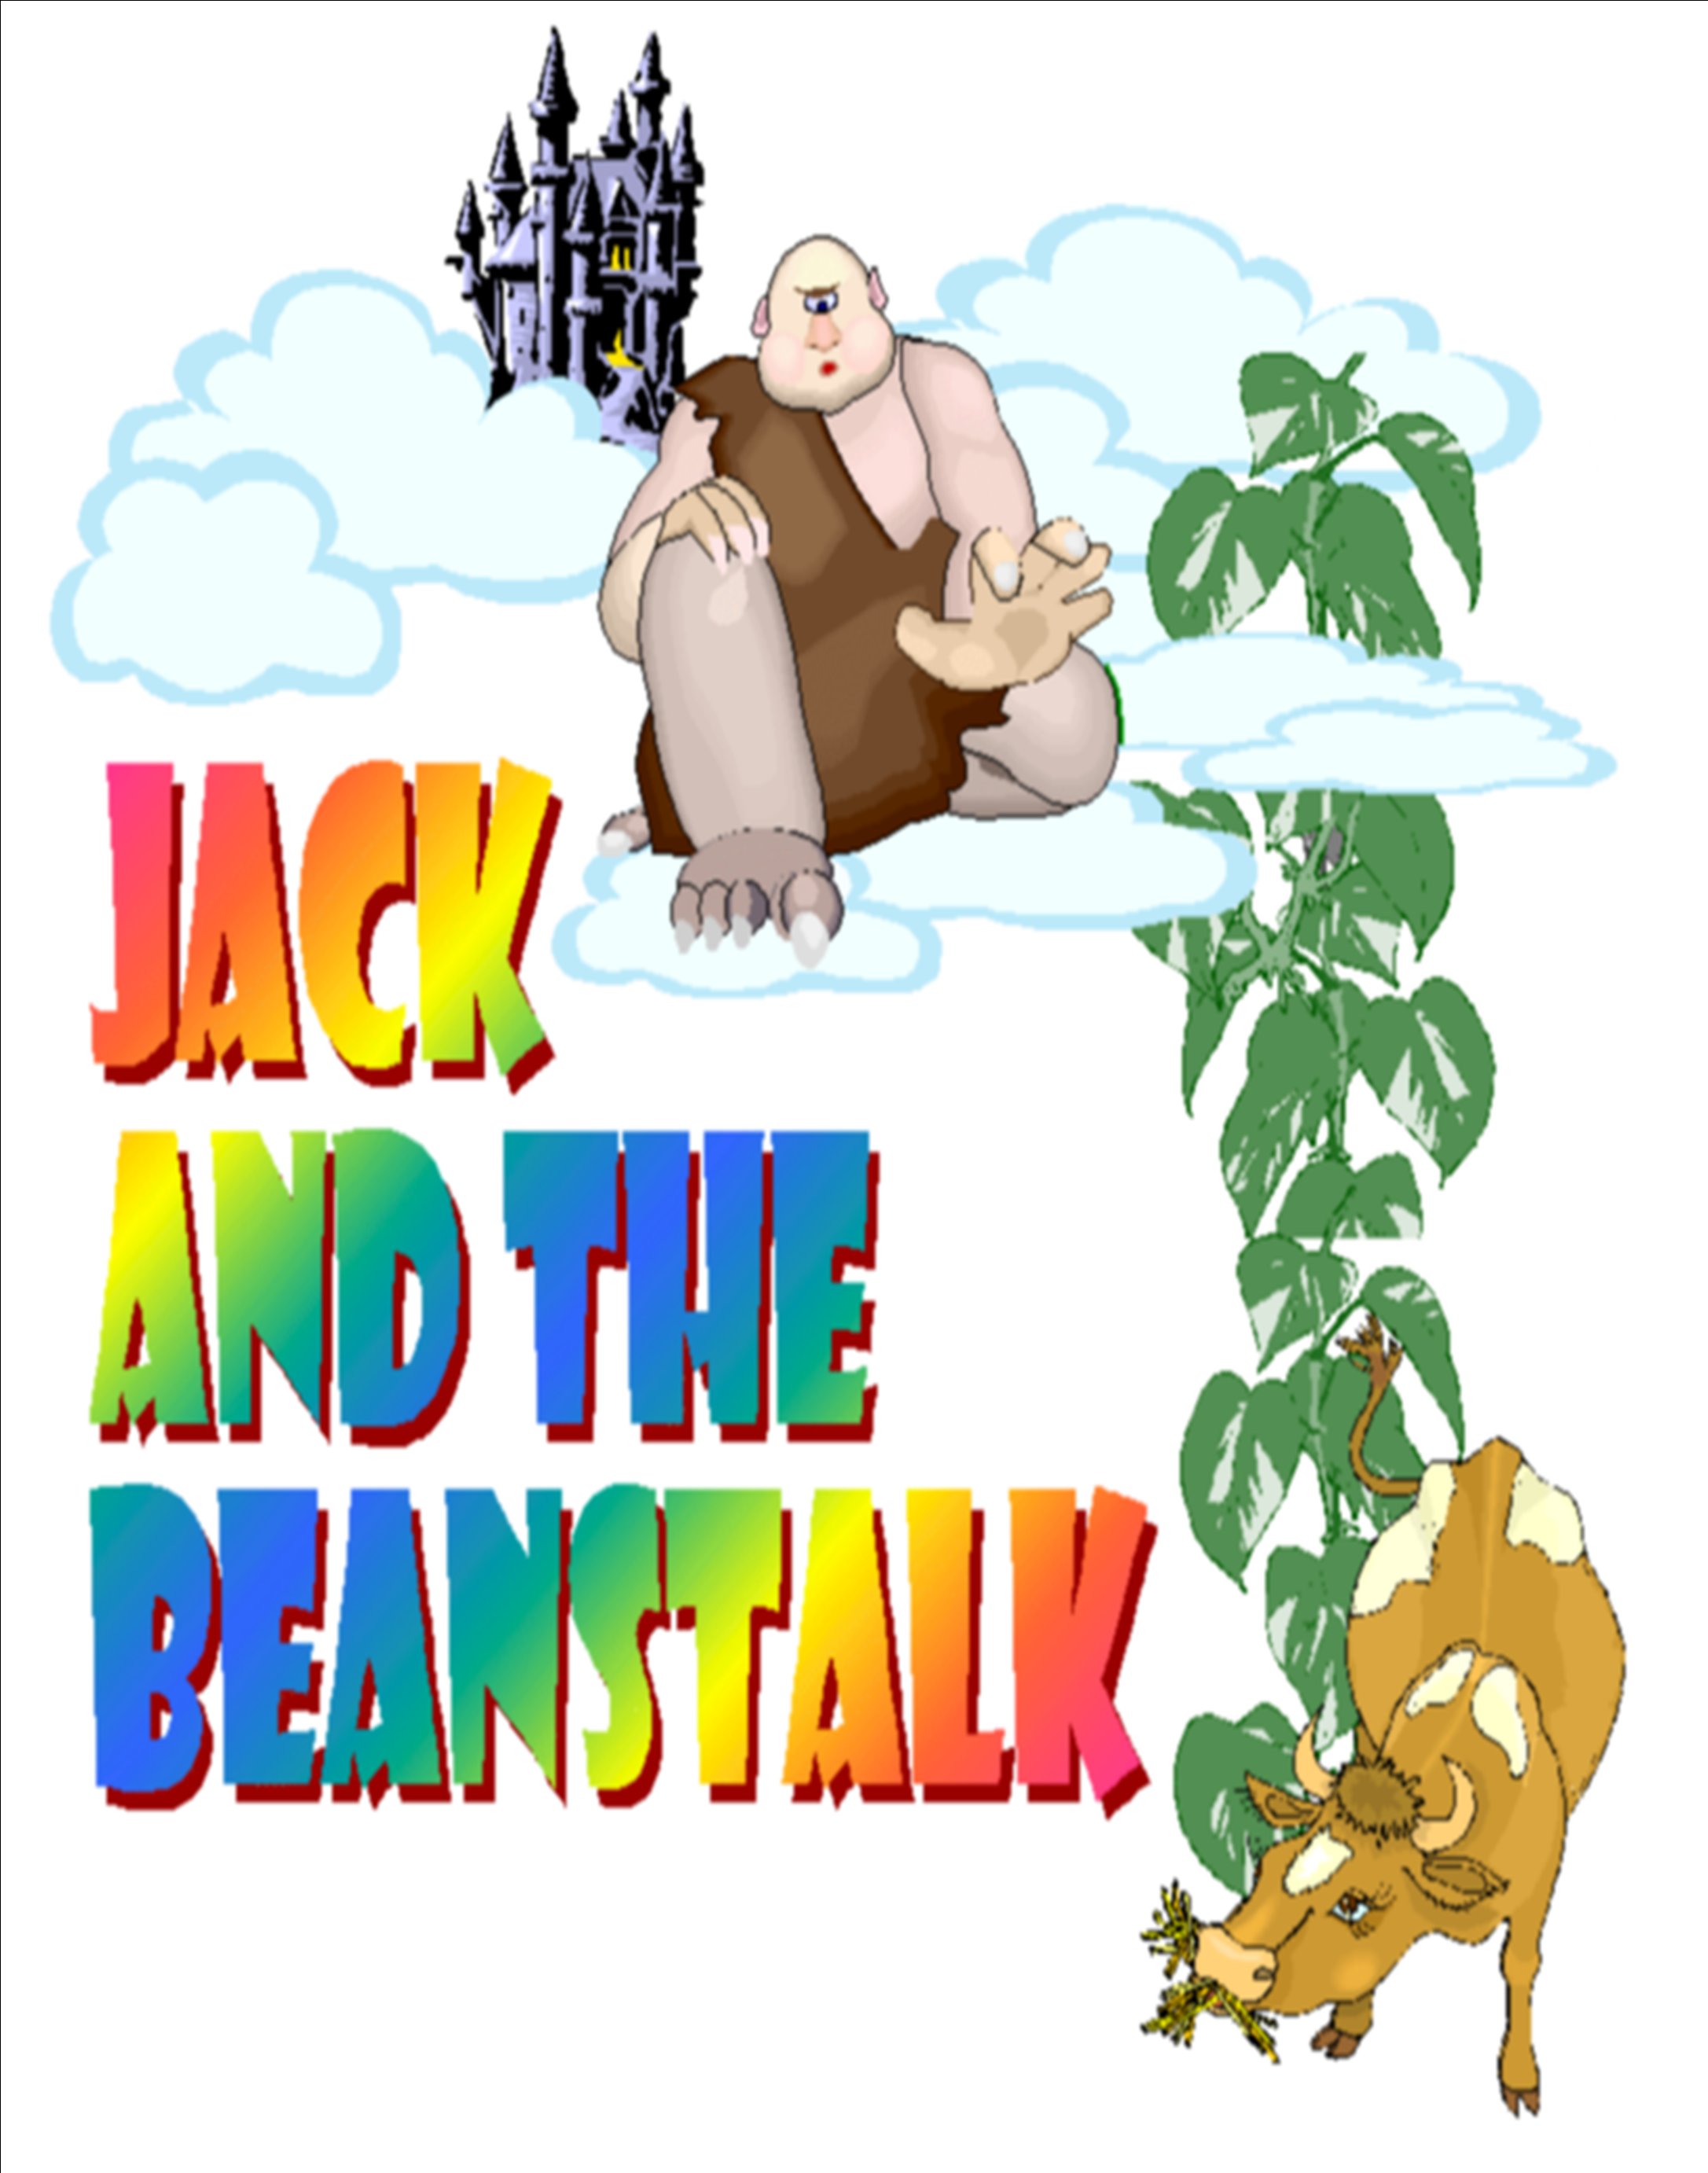 mother clipart jack and the beanstalk